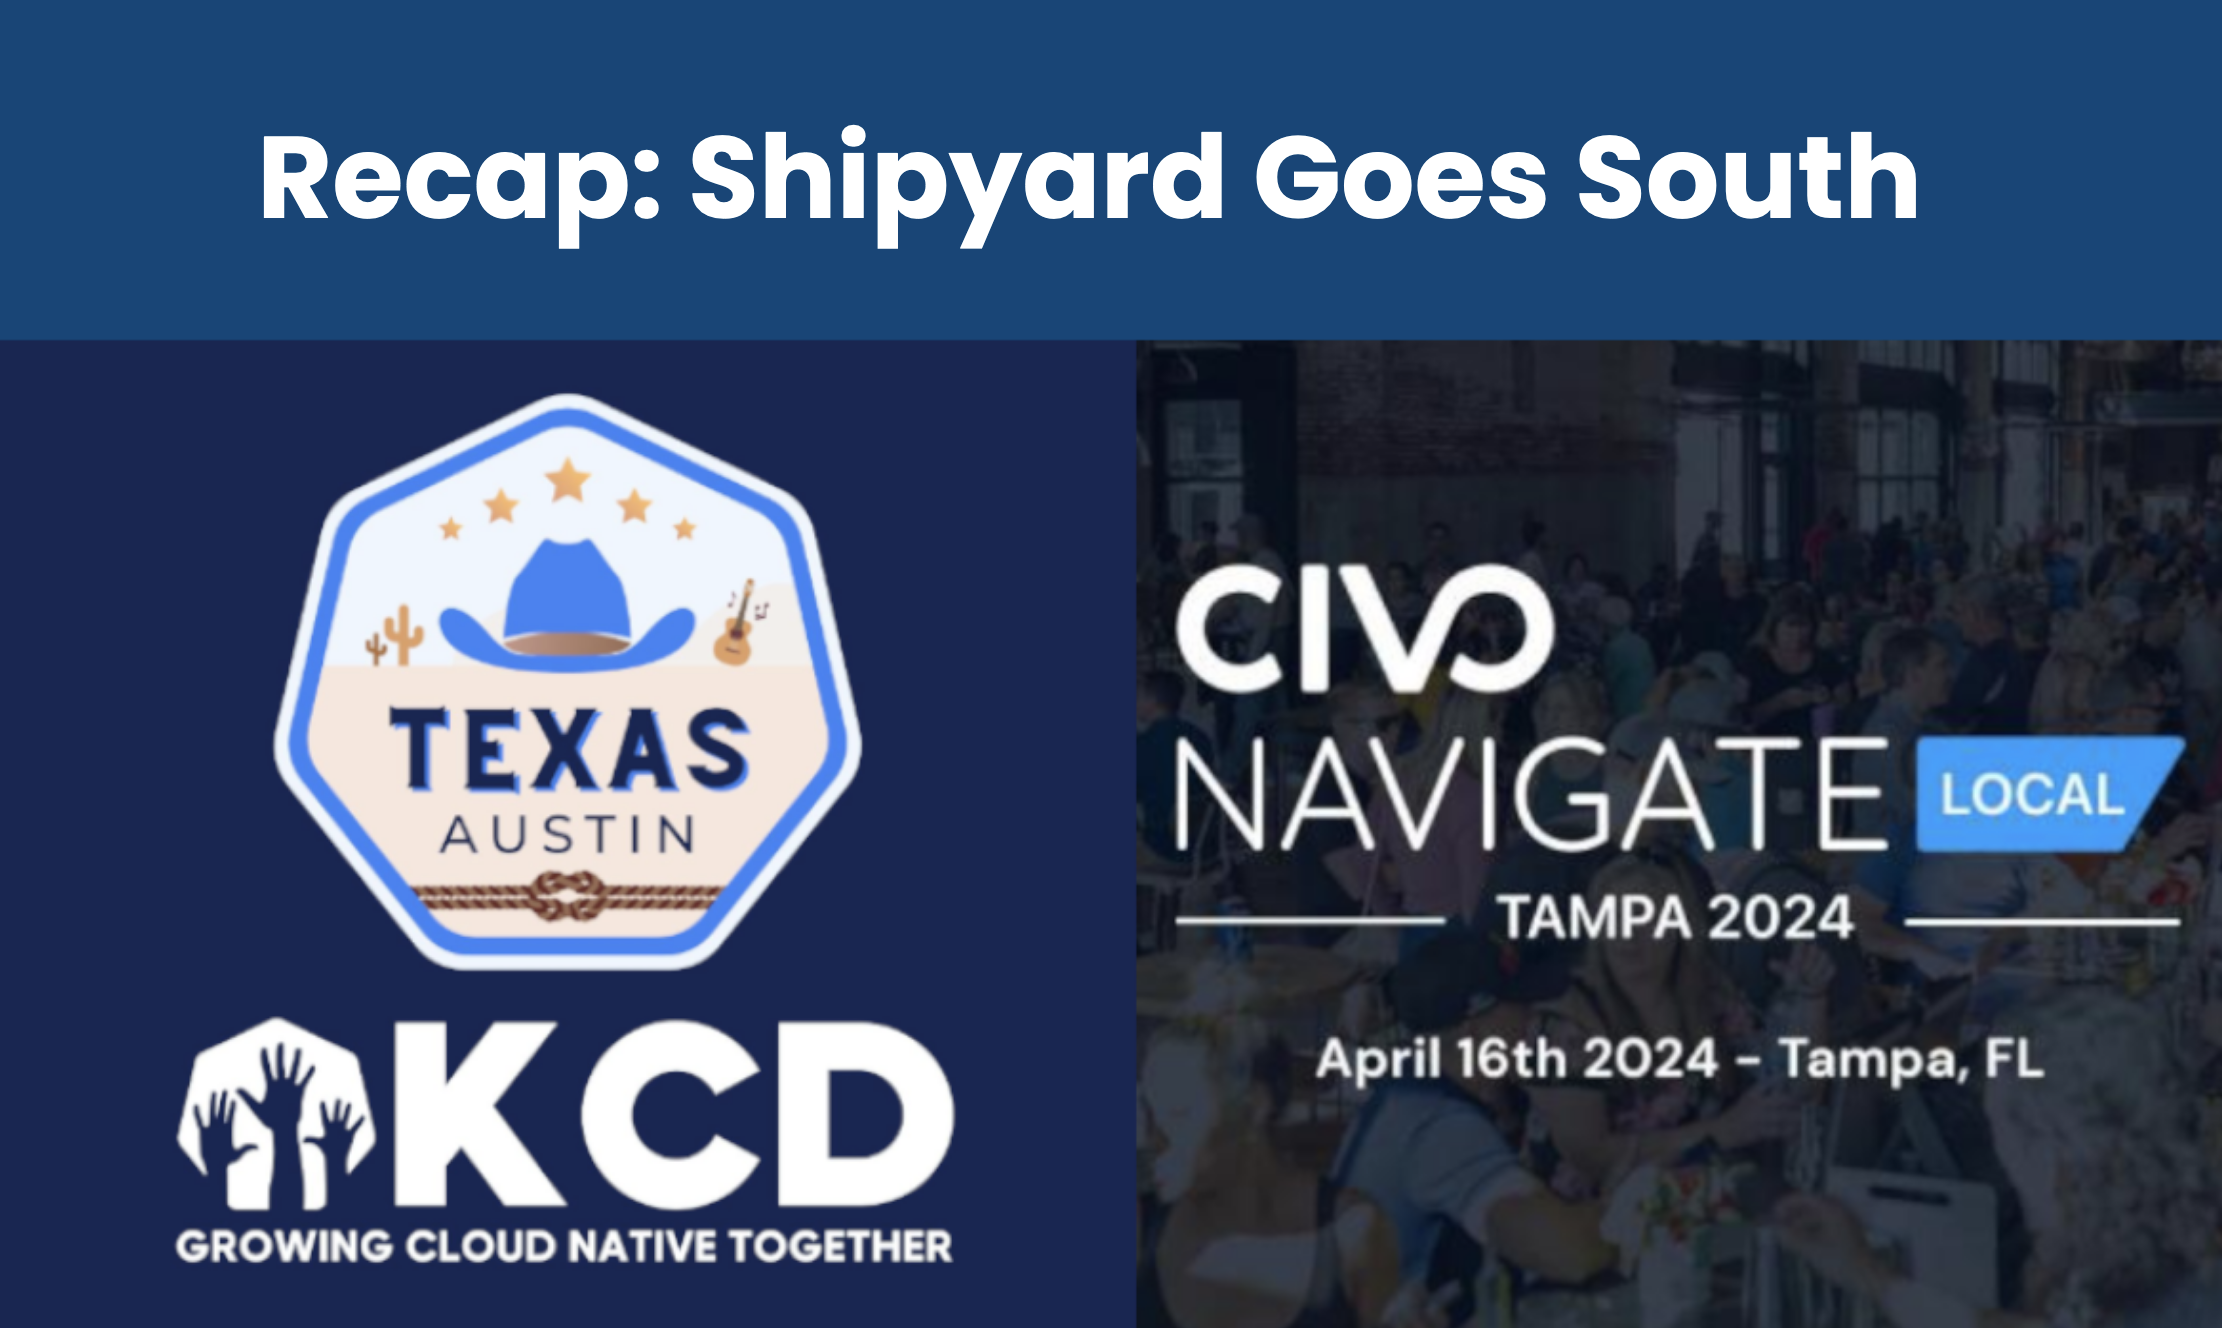 Shipyard went to KCD Texas and Civo Navigate Local Tampa in 2024!